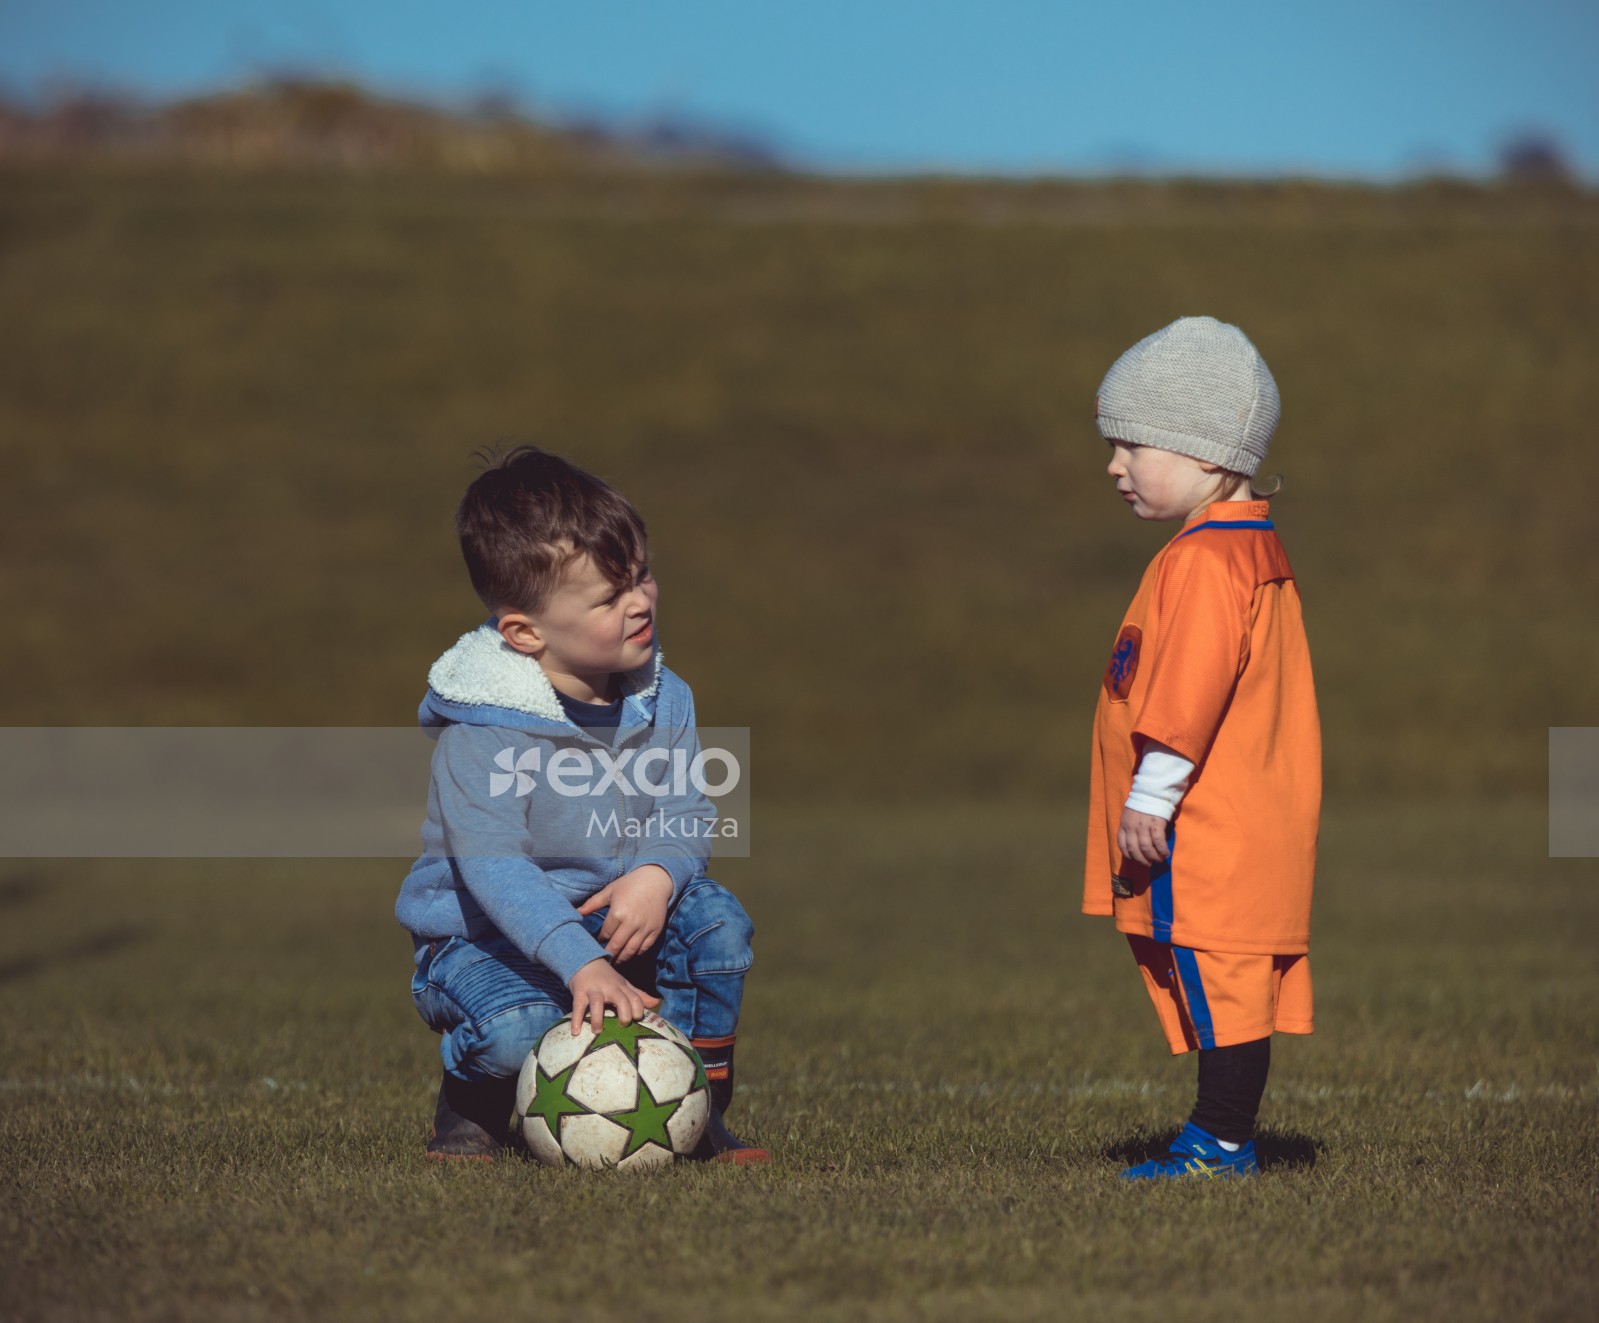 Little boy in blue and girl in orange attire at Little Dribblers soccer match